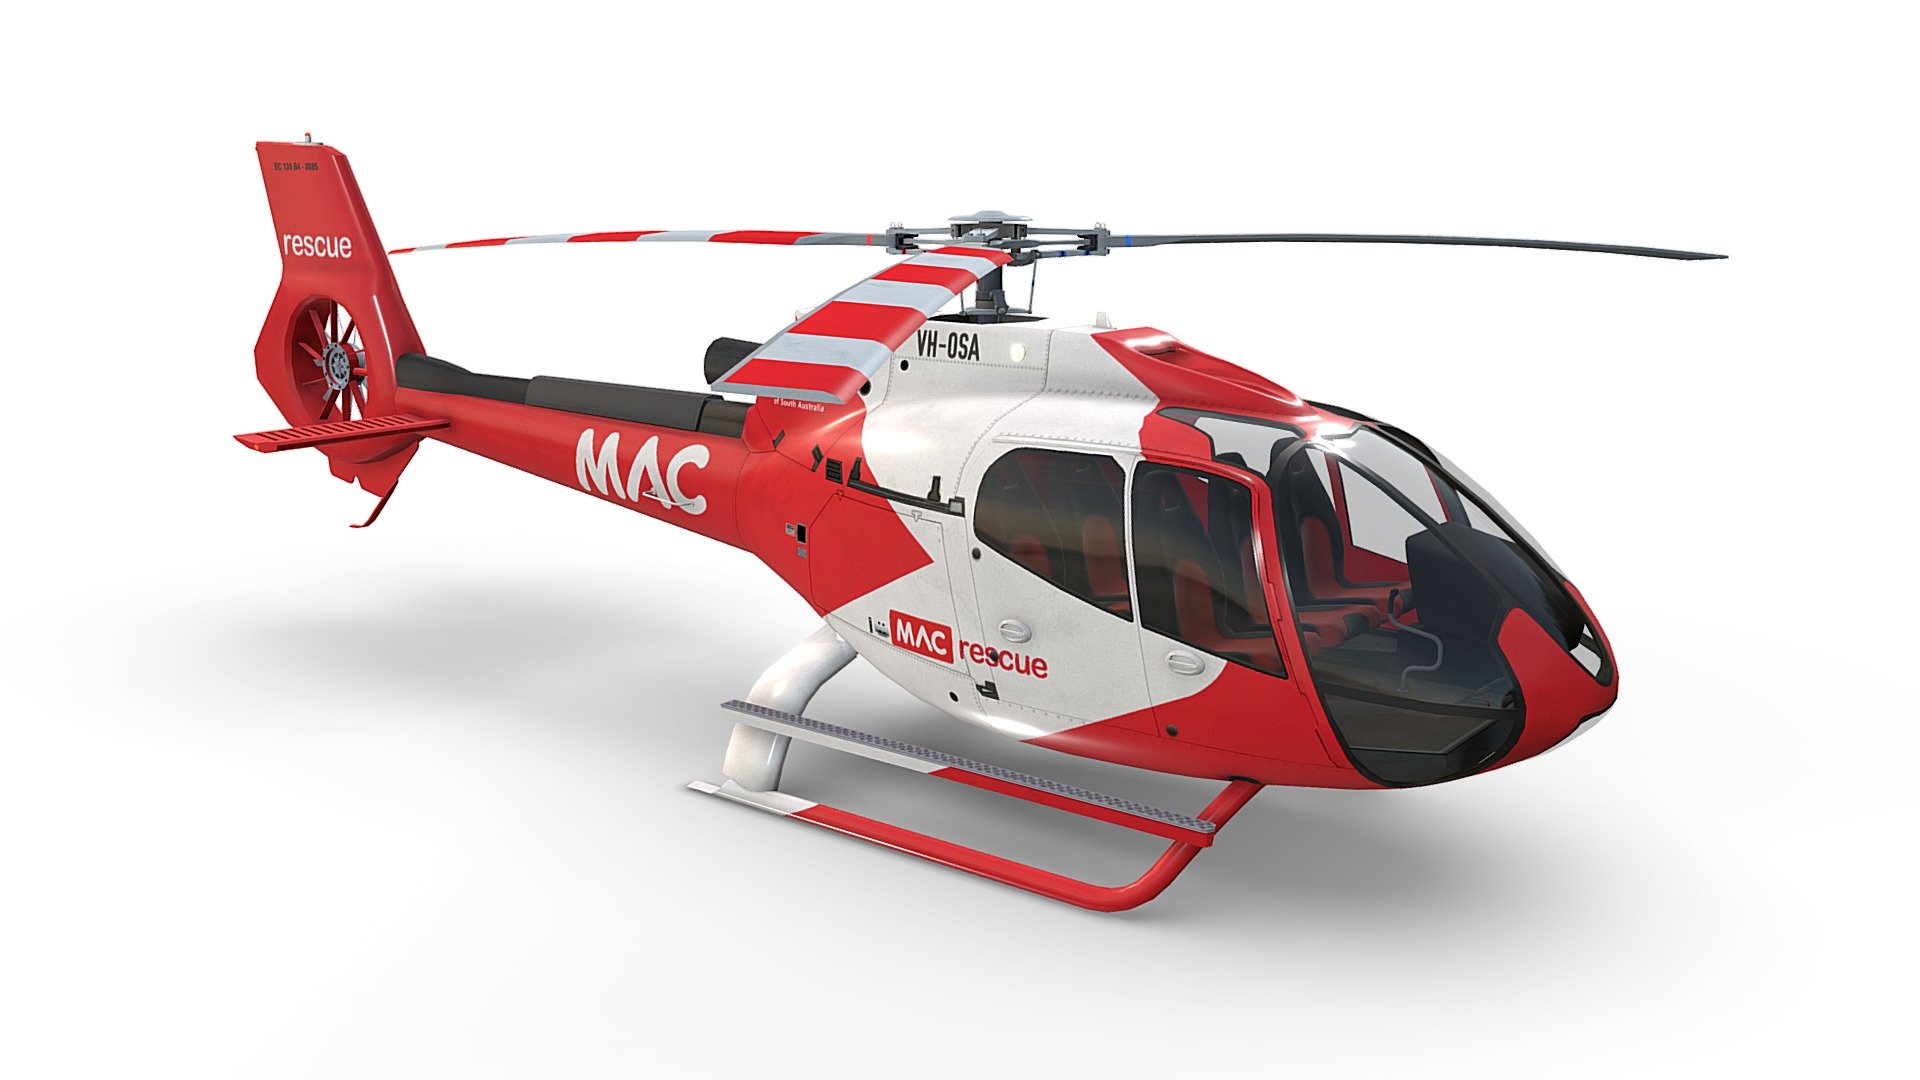 MAC Rescue Helicopter Airbus H130 Livery 2. Game ready, realtime optimized Airbus Helicopter H130 with high visual accuracy. Both PBR workflows ready native 4096 x 4096 px textures. Clean lowpoly mesh with 4 preconfigured level of details LOD0 19710 tris, LOD1 10462 tris, LOD2 7388 tris, LOD3 5990 tris. Properly placed rotors pivots for flawless rotations. Simple capsule built interior that fits perfectly the body. 100% human controlled triangulation. All parts 100% unwrapped non-overlapping. Made using blueprints in real world scale meters. Included are flawless files .max (native 3dsmax 2014), .fbx, and .obj. All LOD are exported seperately and together in each file format 3d model